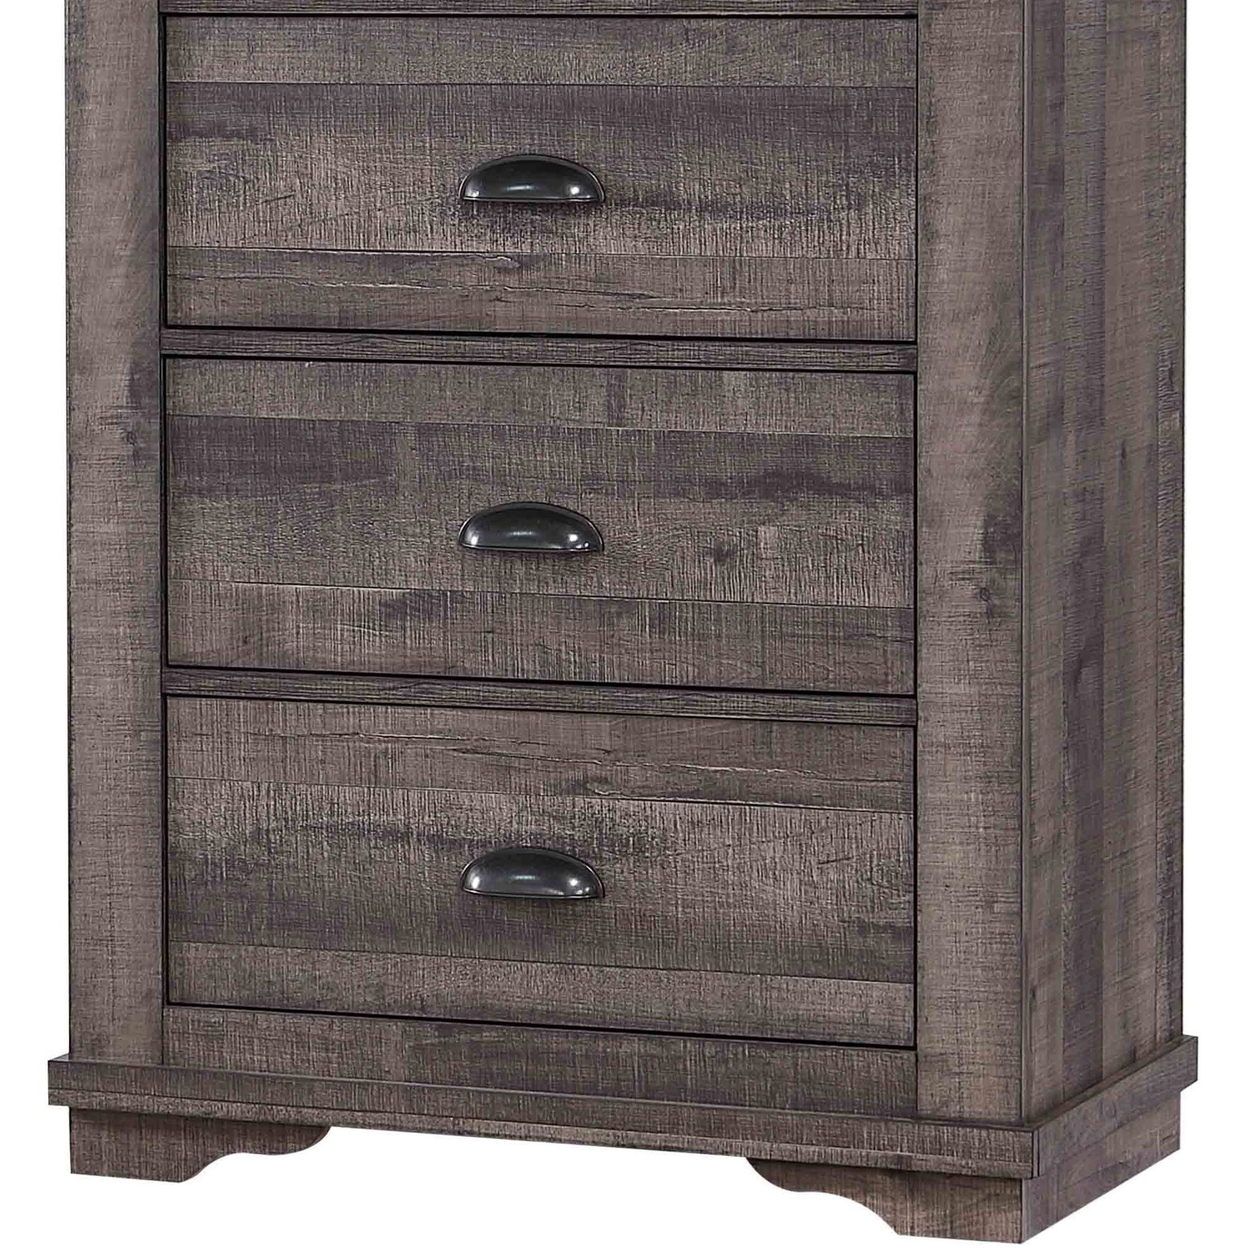 48 Inch 4 Drawer Wooden Chest With Cup Pulls, Gray- Saltoro Sherpi